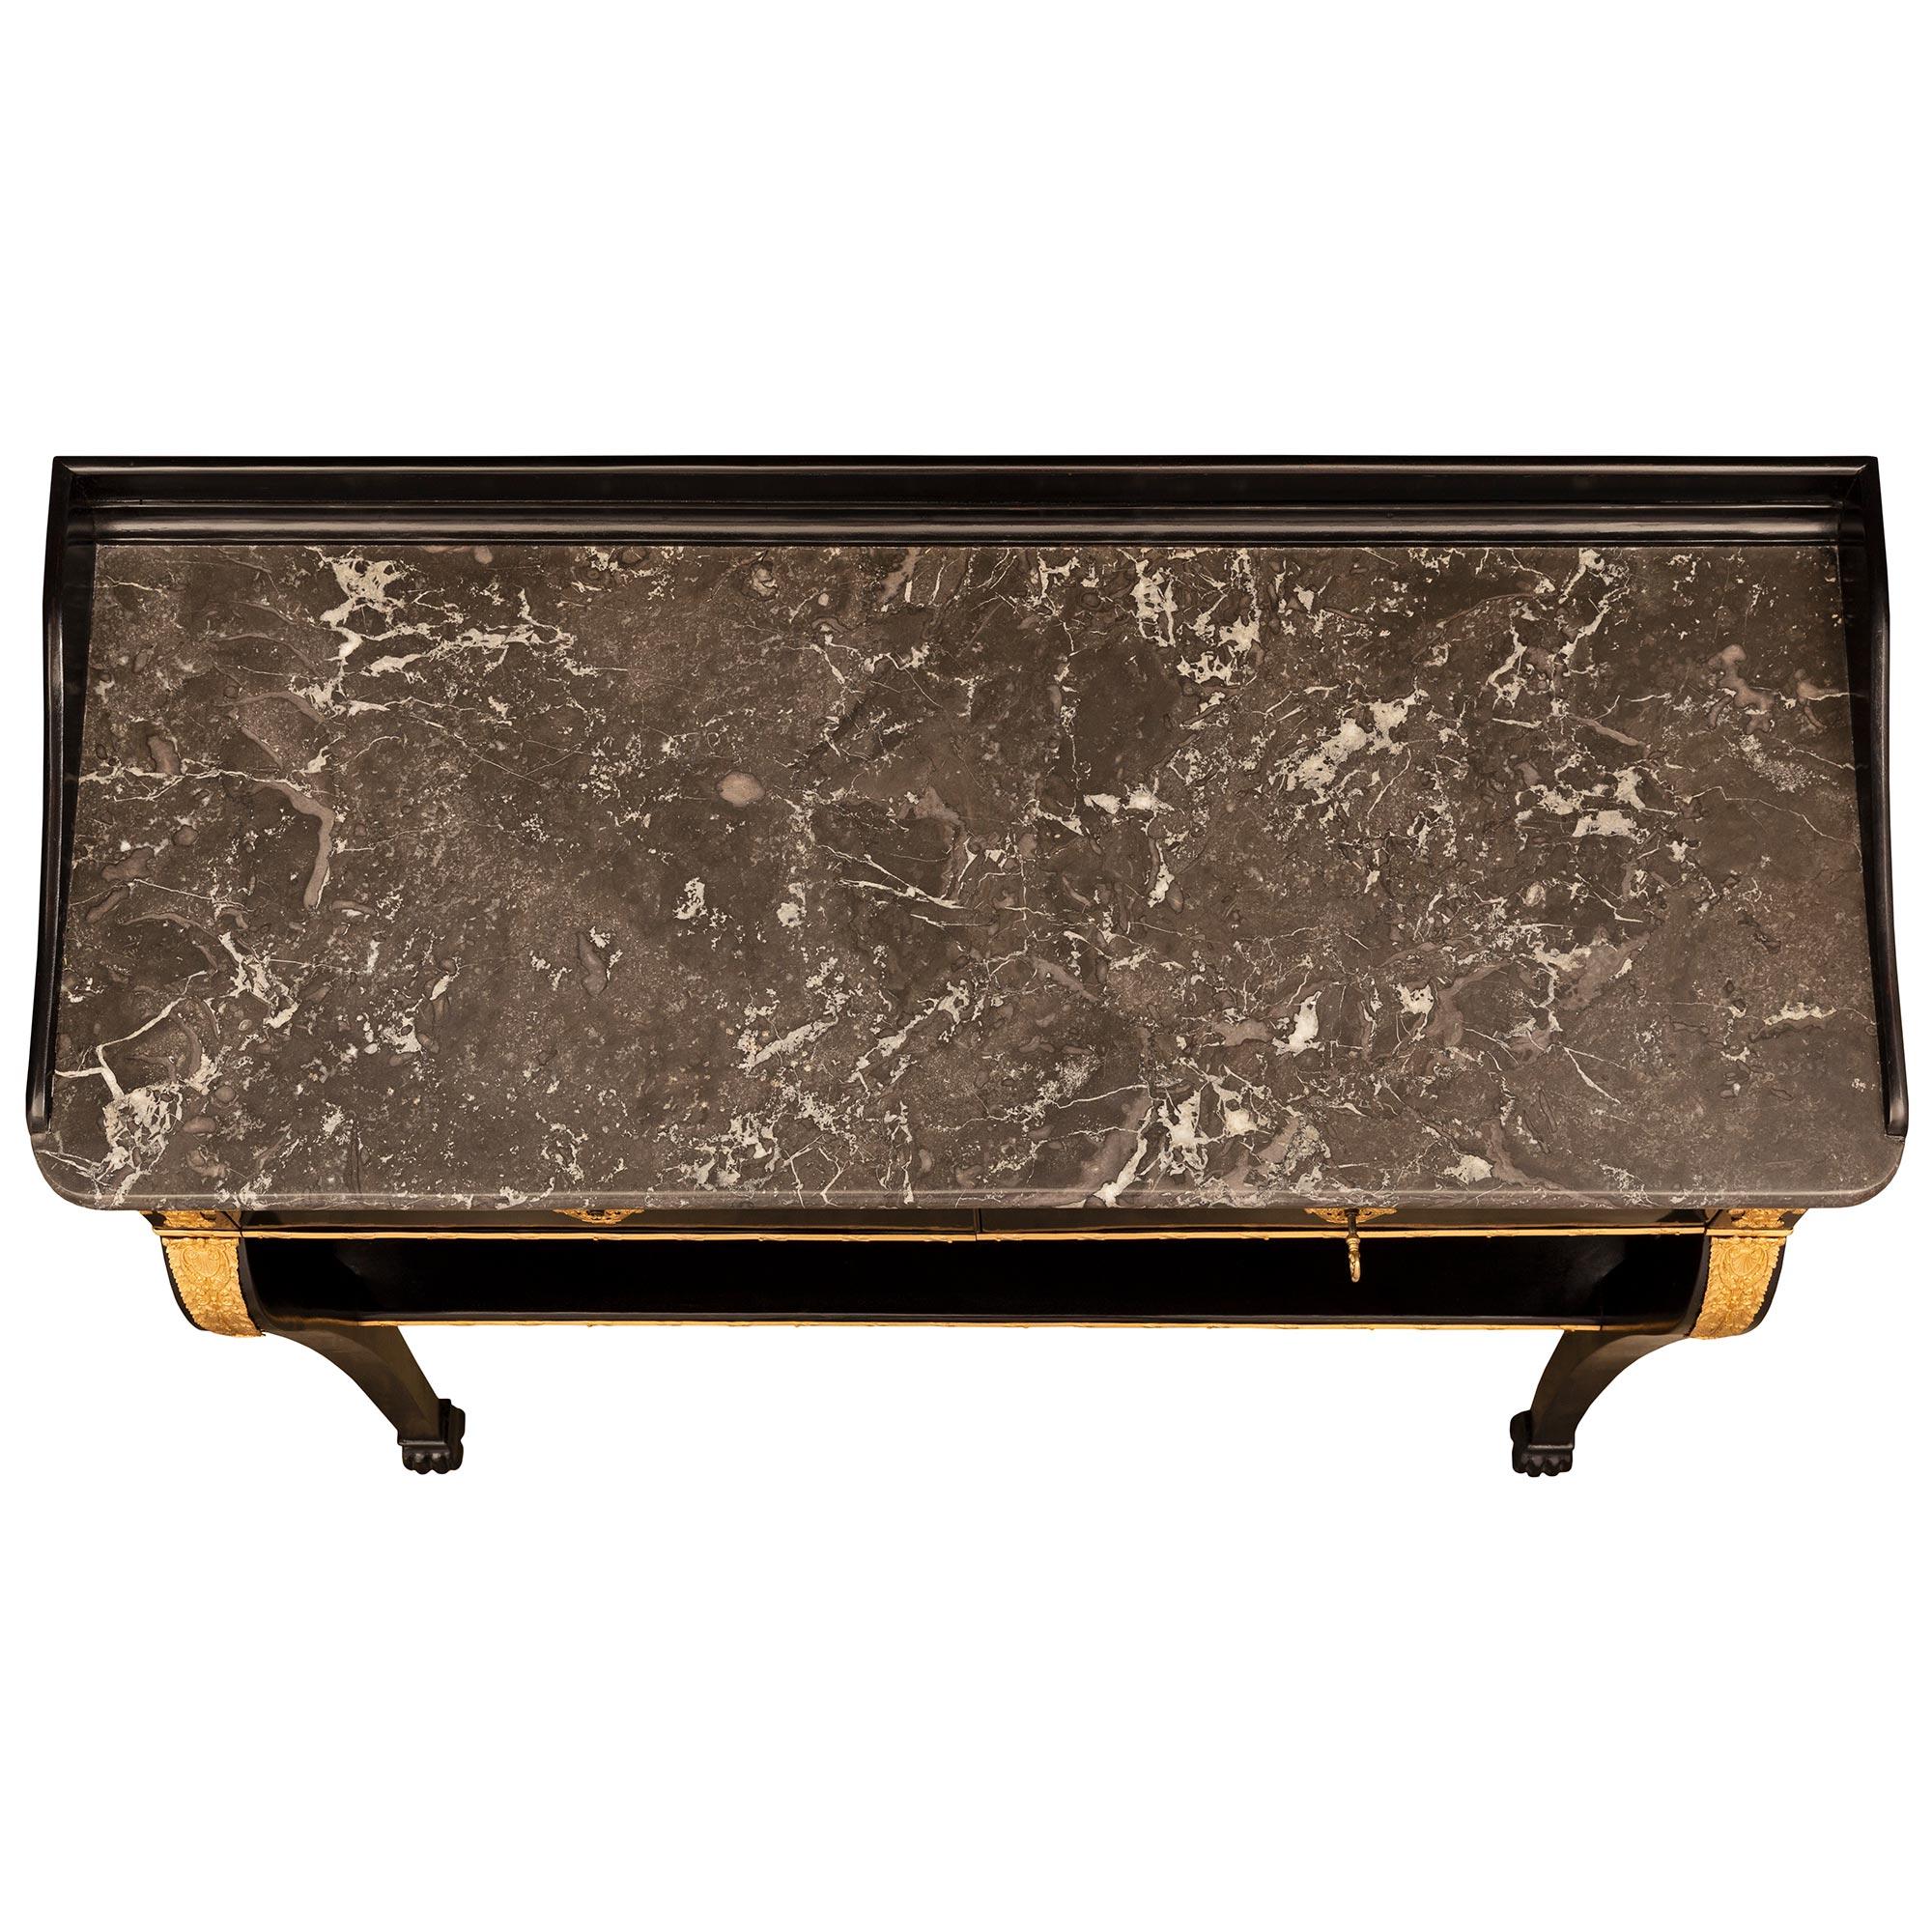 A striking and very unique French 19th century Neo-Classical st. ebonized Fruitwood and Sainte-Anne des Pyrénées marble console. The freestanding console is raised by elegantly scrolled legs at the front with handsome paw feet and straight legs with